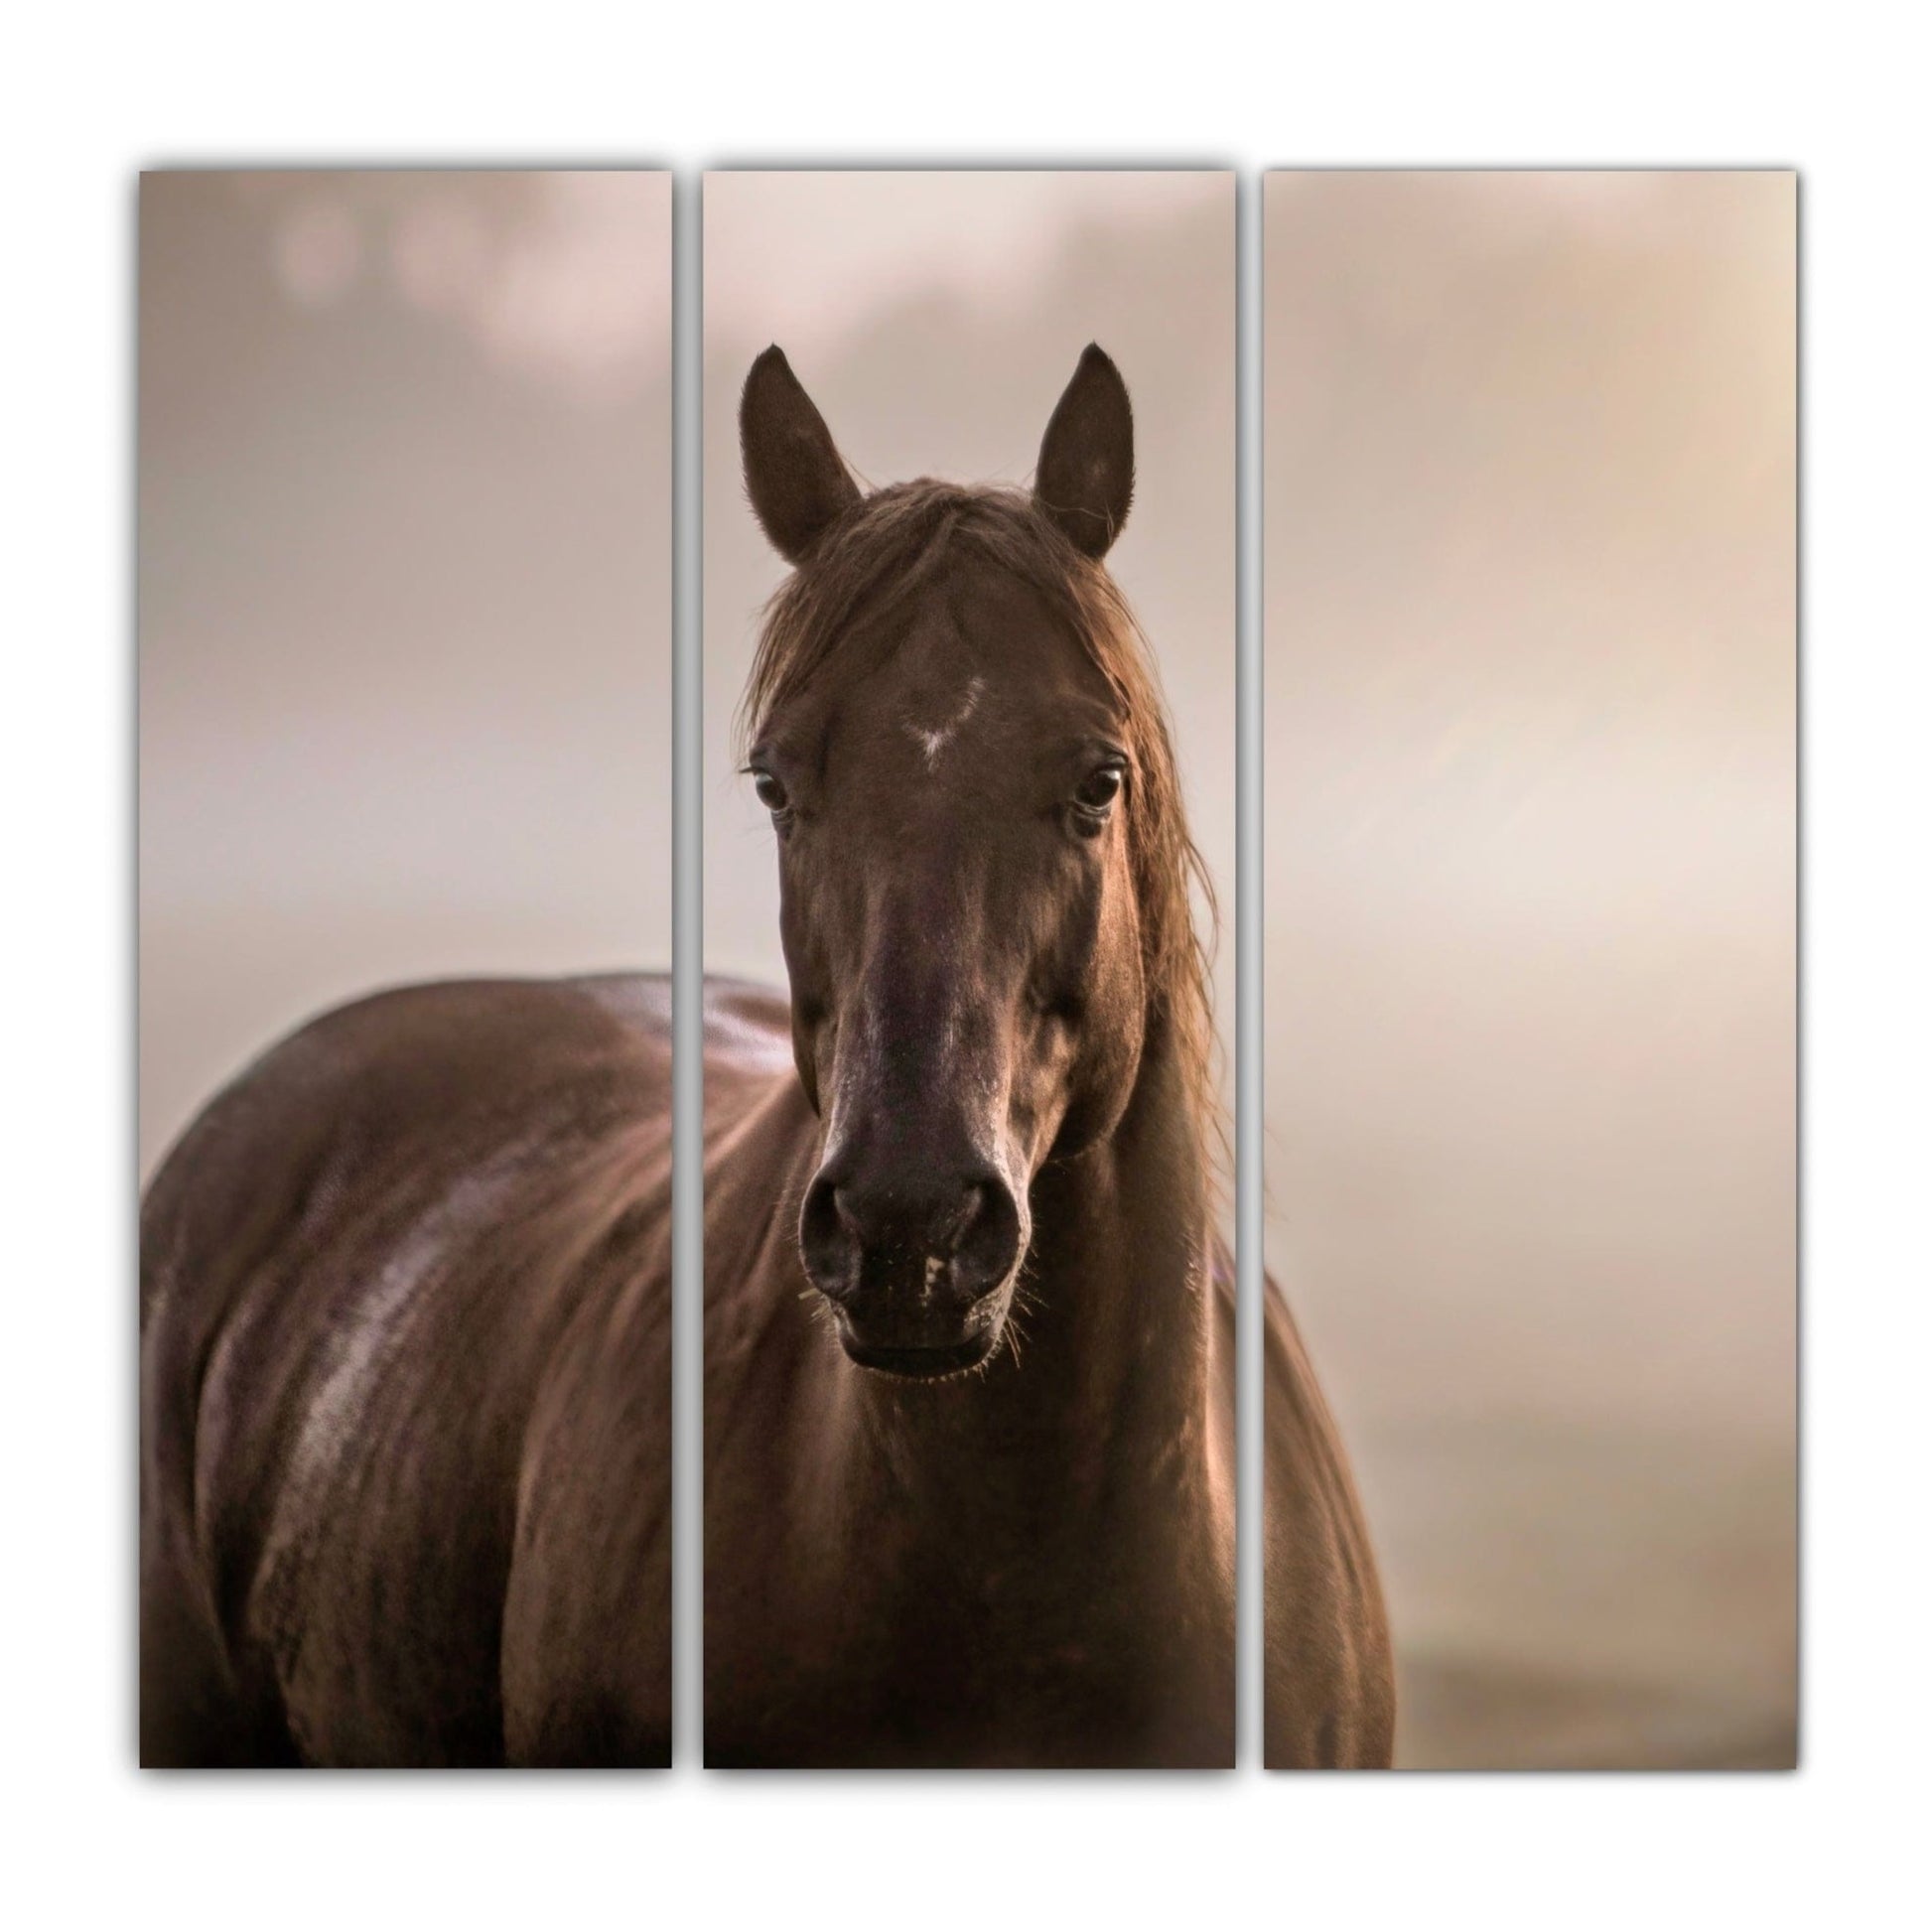 Square Horse Triptych Canvas 48" x 48" (3 @ 16" x 48") Wall Art Teri James Photography